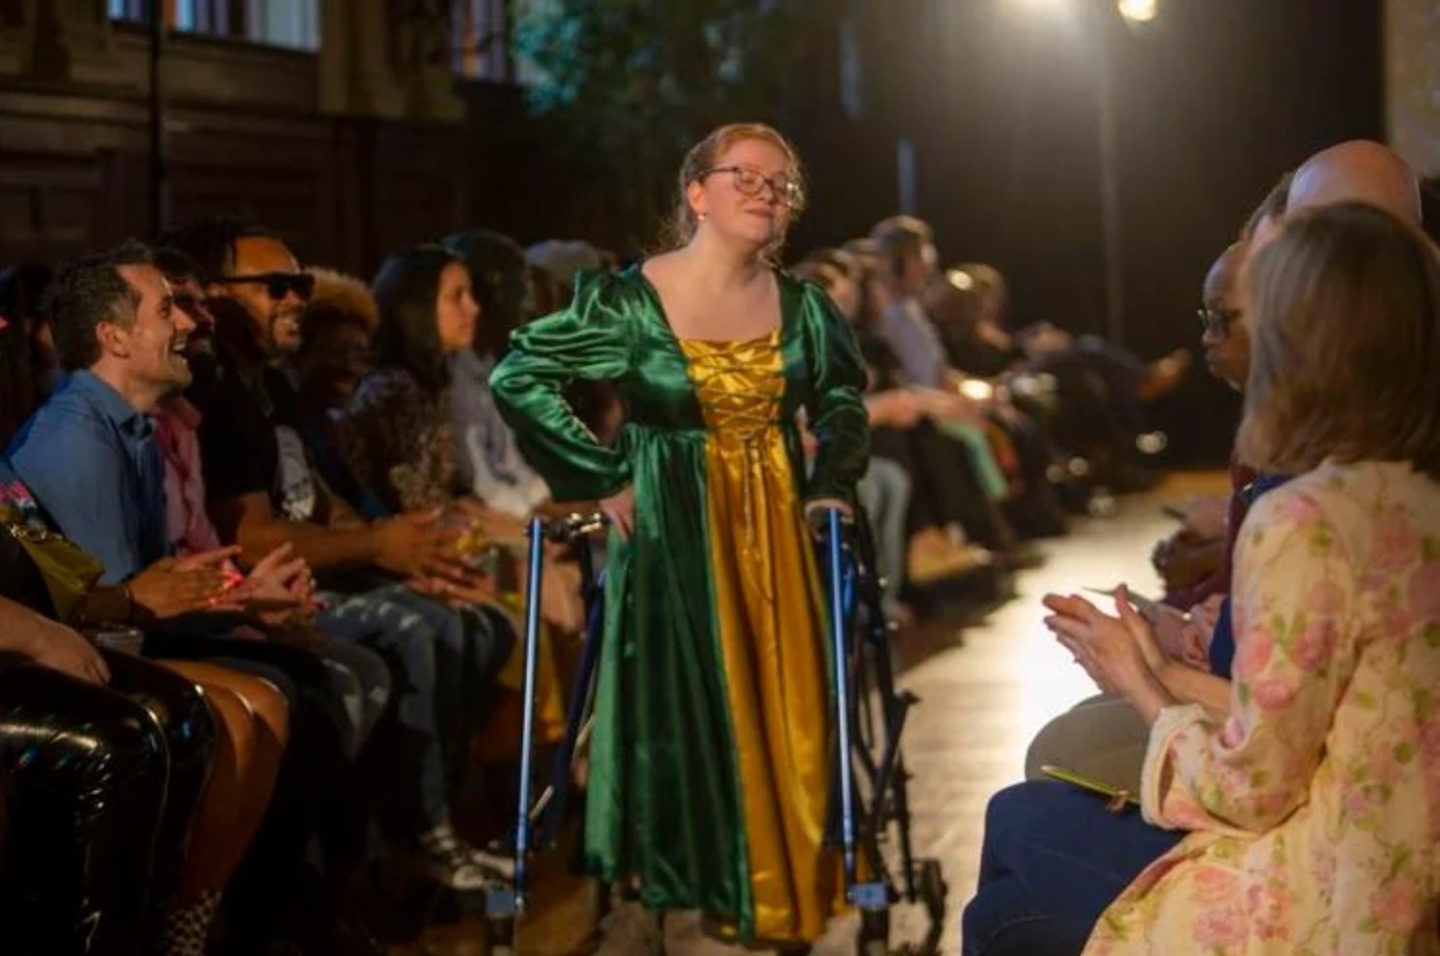 A young woman with a walker modeling a fairytale green and gold dress pauses on a fashion design show runway and smiles to an applauding audience.